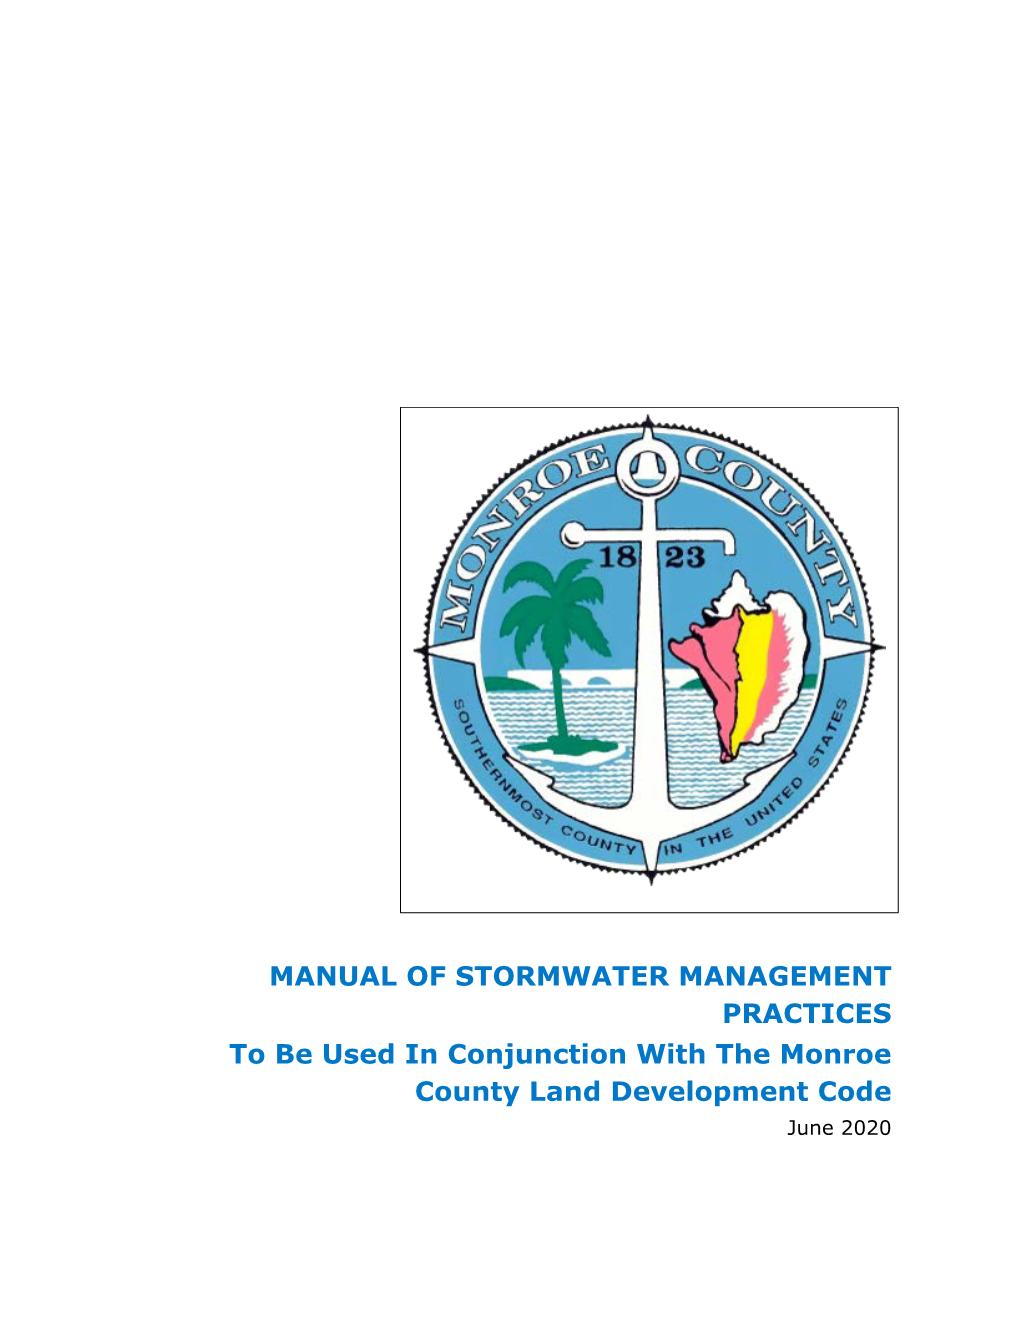 Manual of Stormwater Management Practices